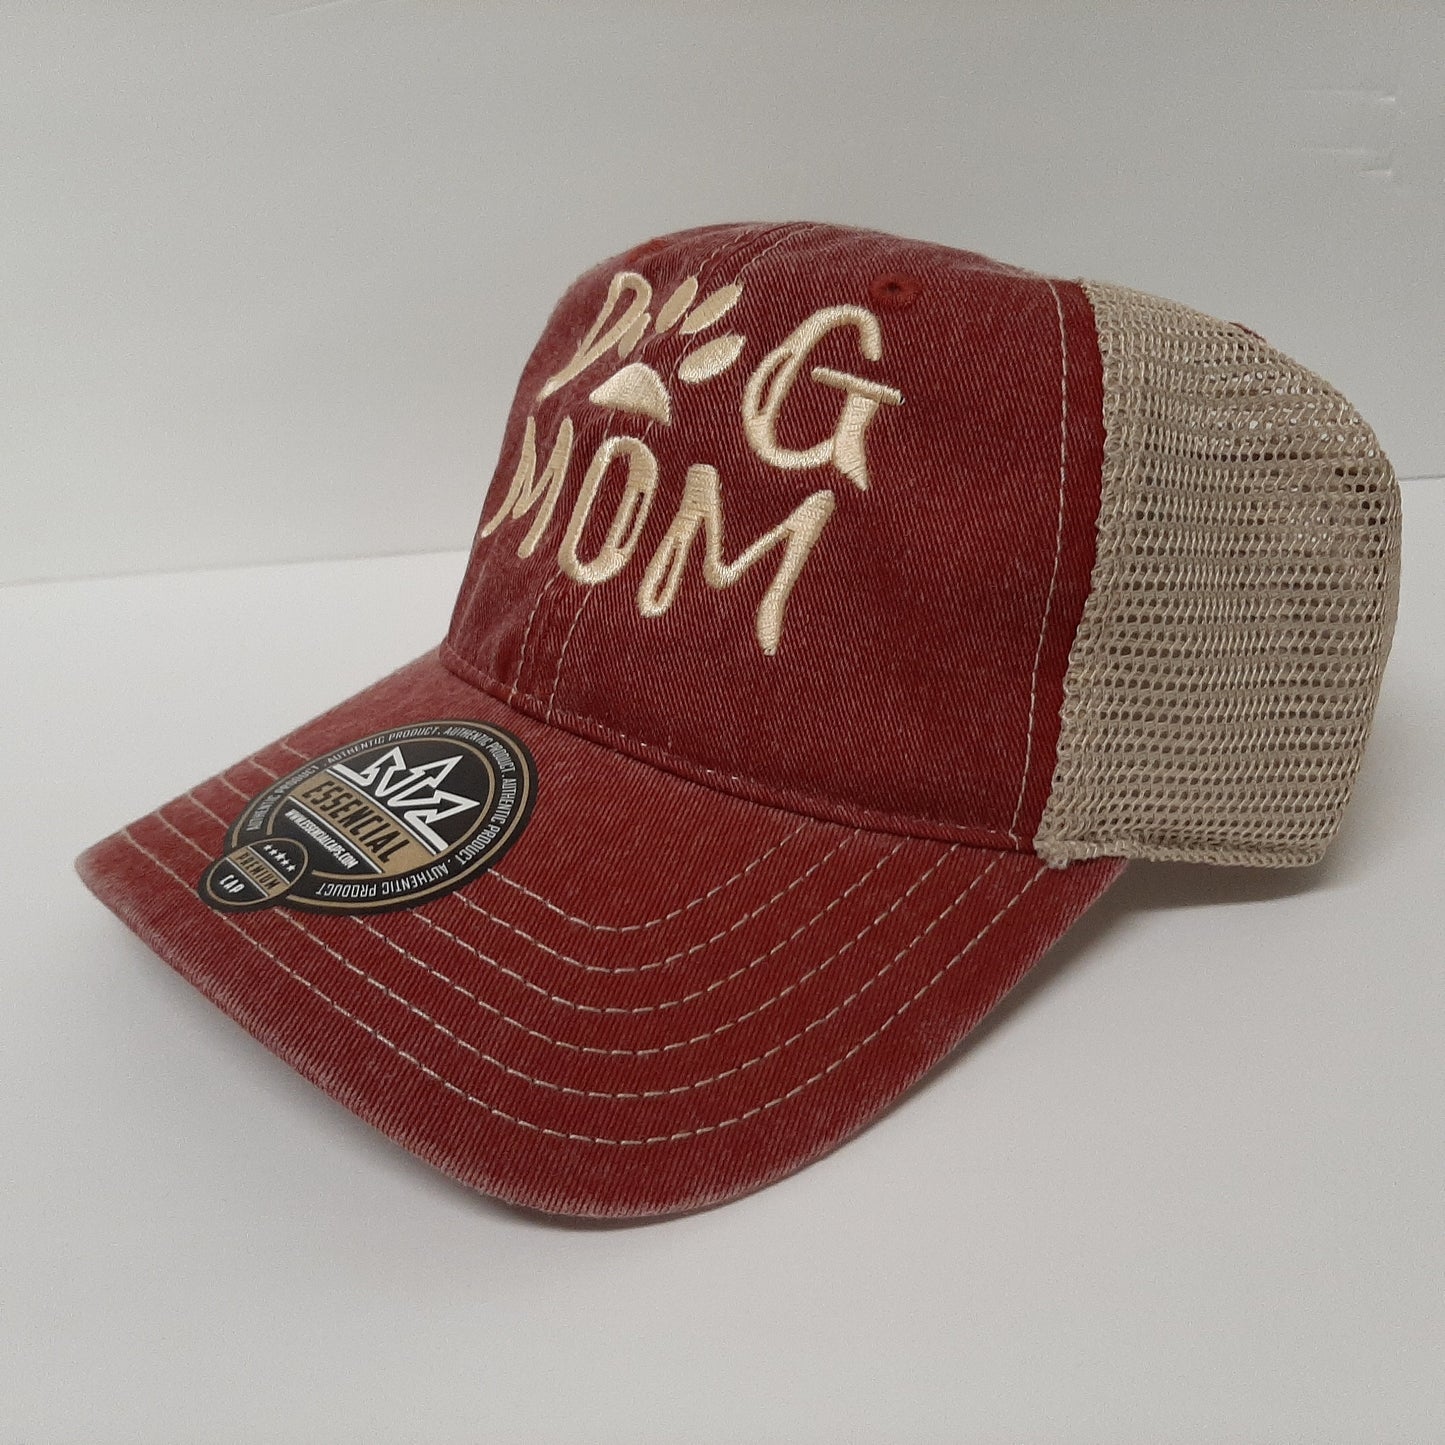 Dog Mom Hat Mesh Snapback Cap Embroidered Rust Red Relaxed Cotton Snapback